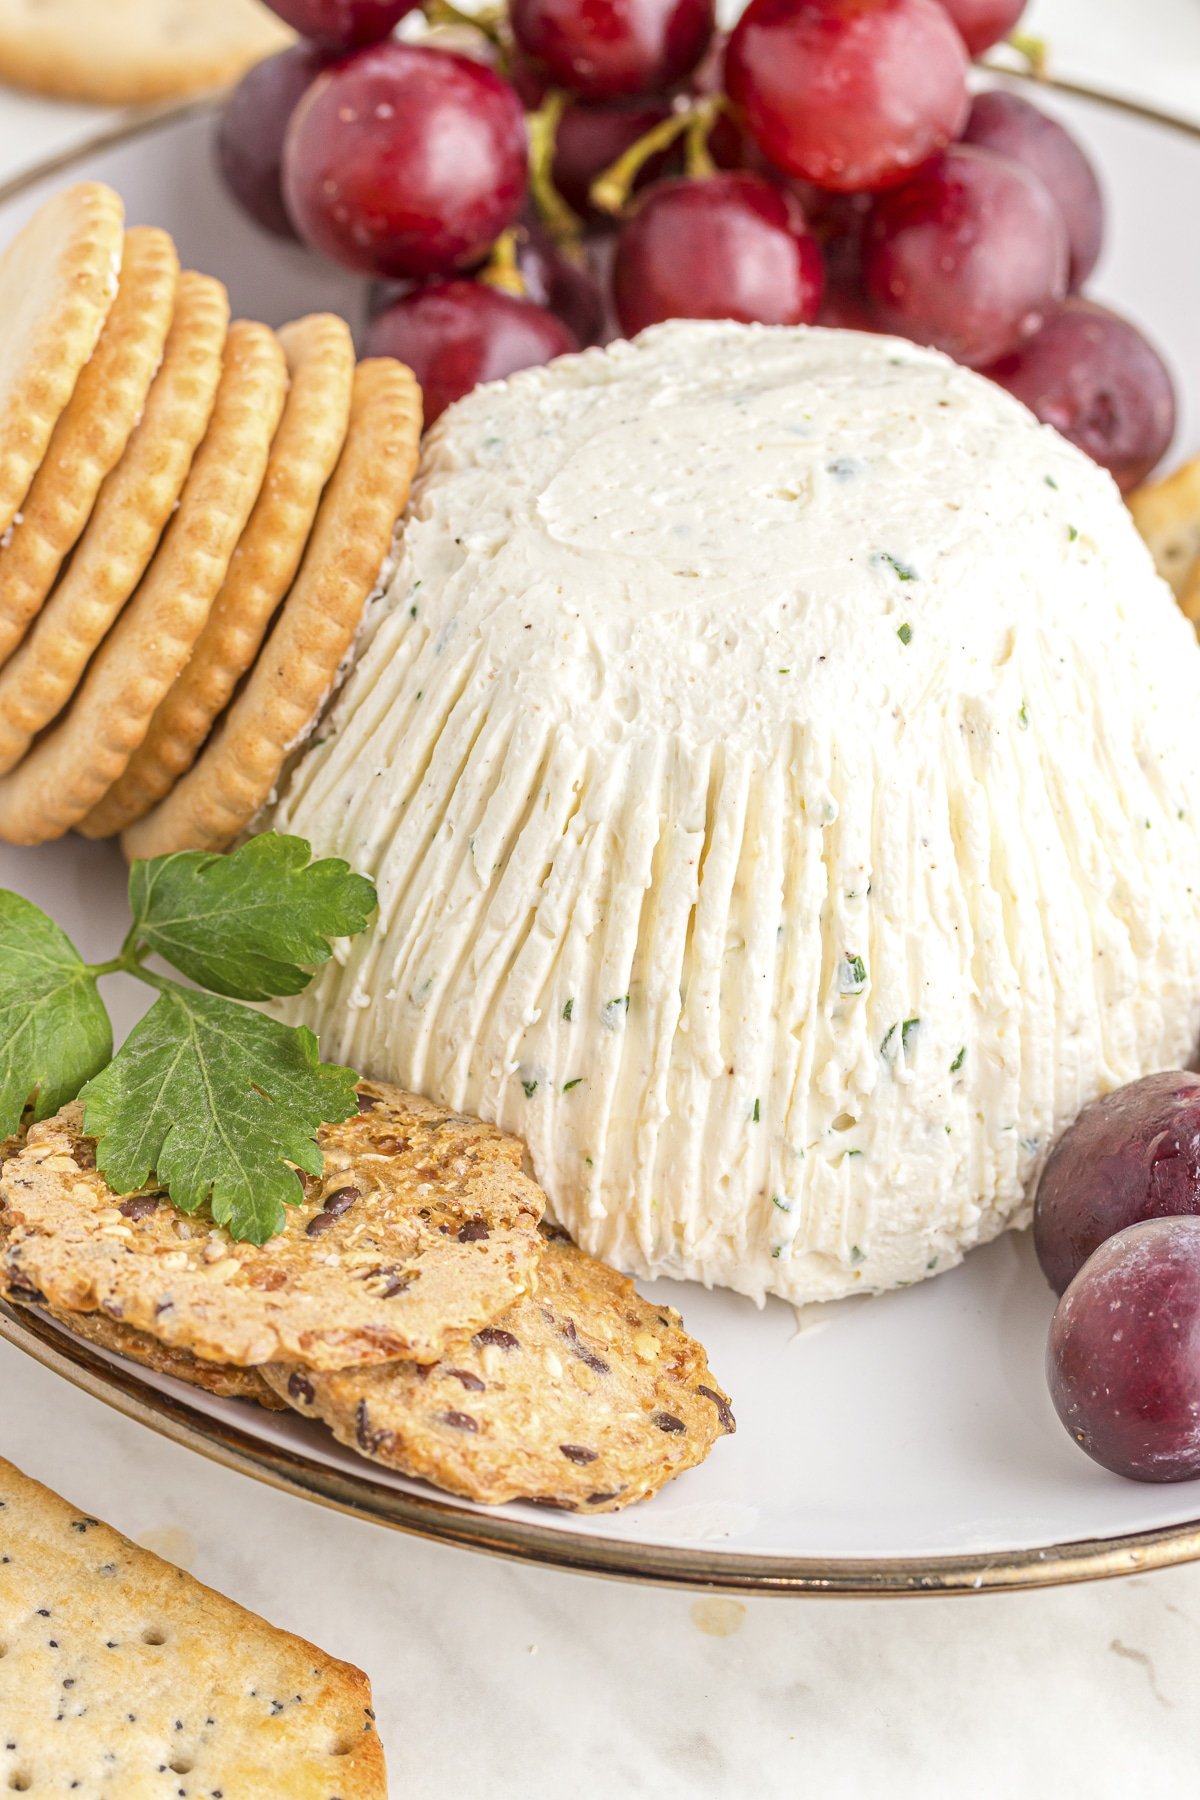 homemade boursin cheese with crackers and grapes.